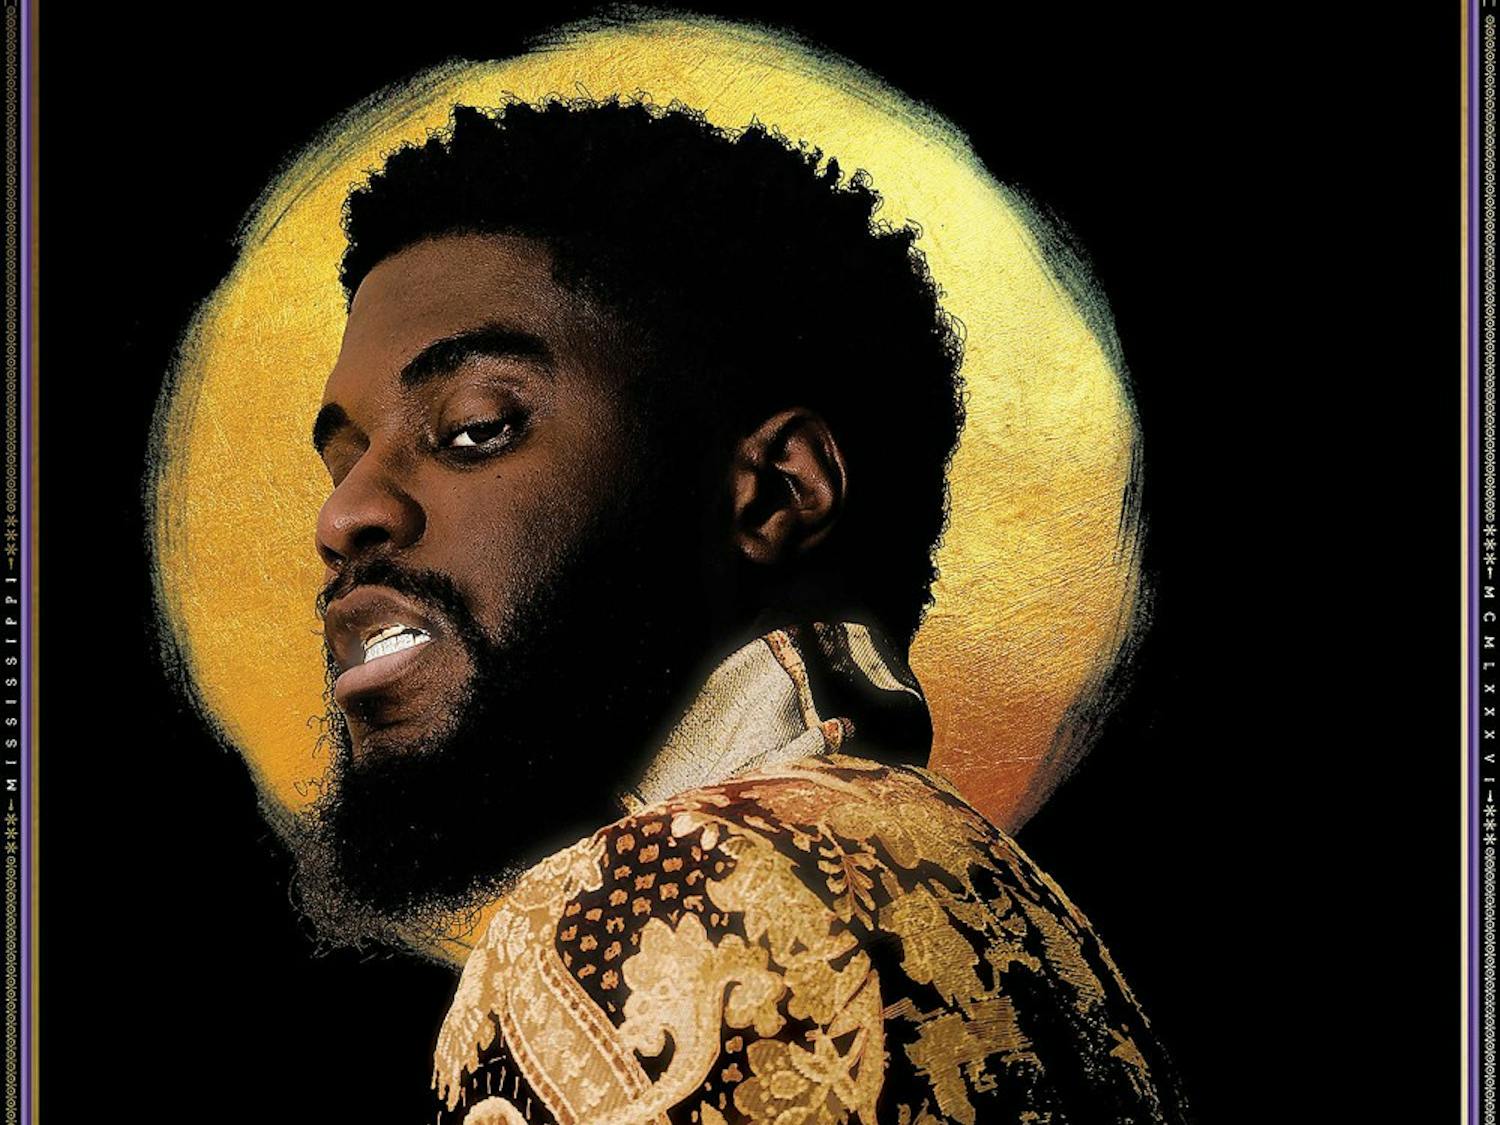 Big K.R.I.T.'s new album, 4eva Is a Mighty Long Time, was released Oct. 27.